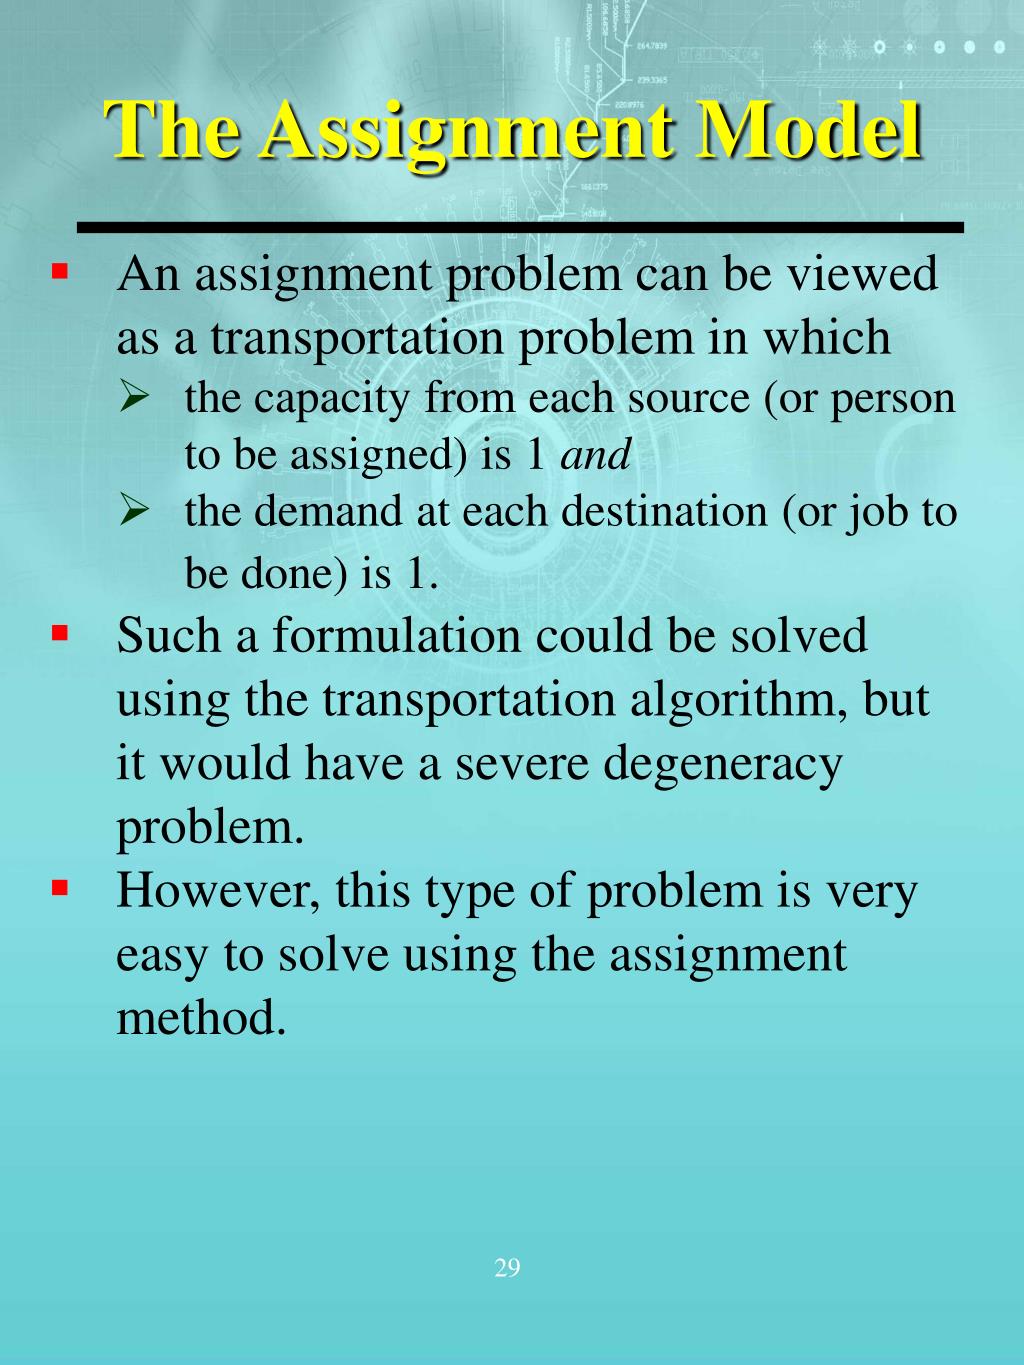 what is assignment problem model